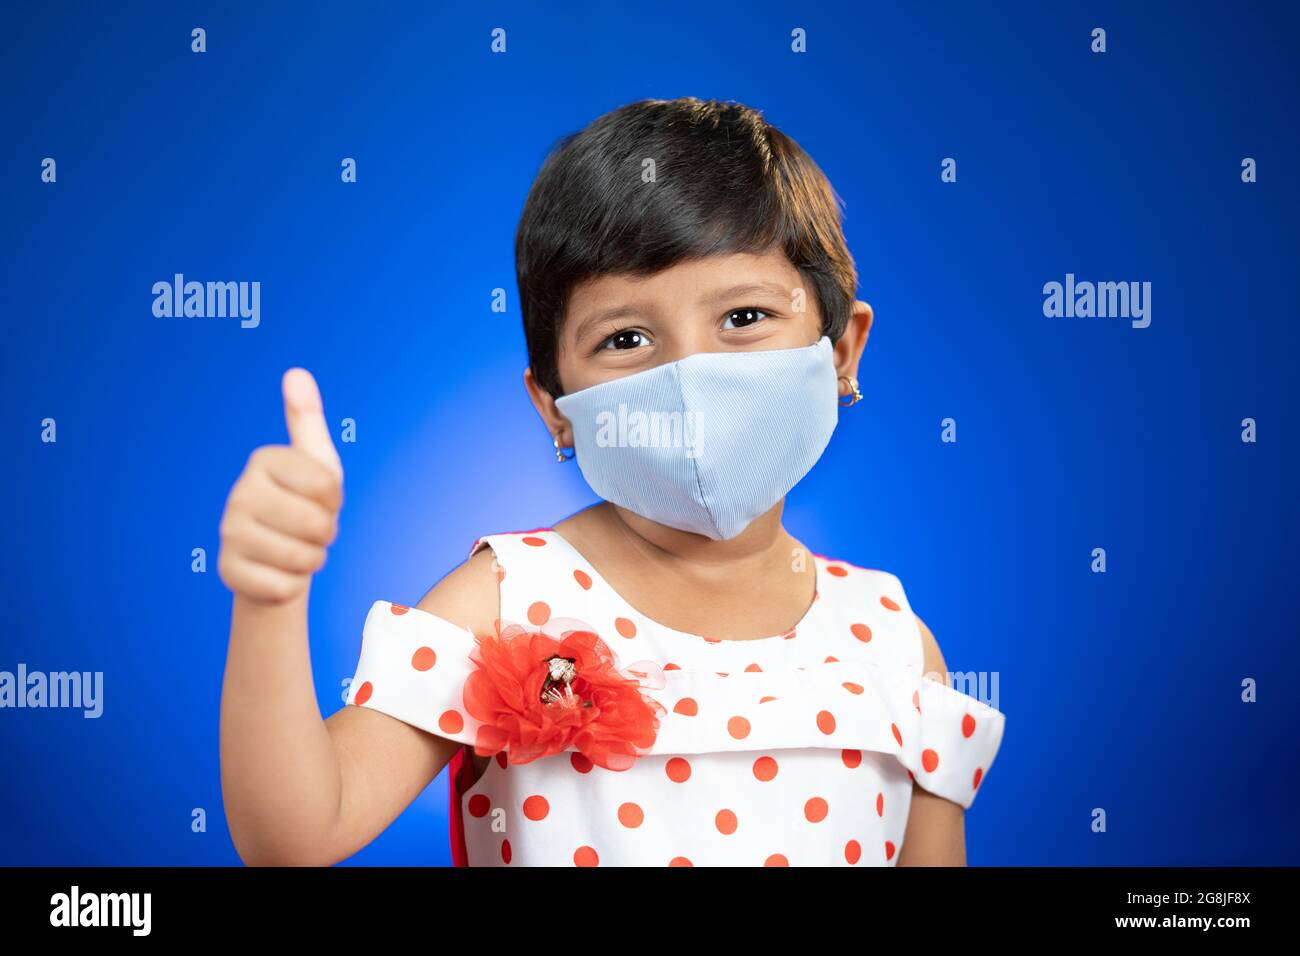 little girl kid adjusting medical face mask and showing thumps up gesture - concept showing of coronavirus covid-19 saferty measures by wearing mask Stock Photo